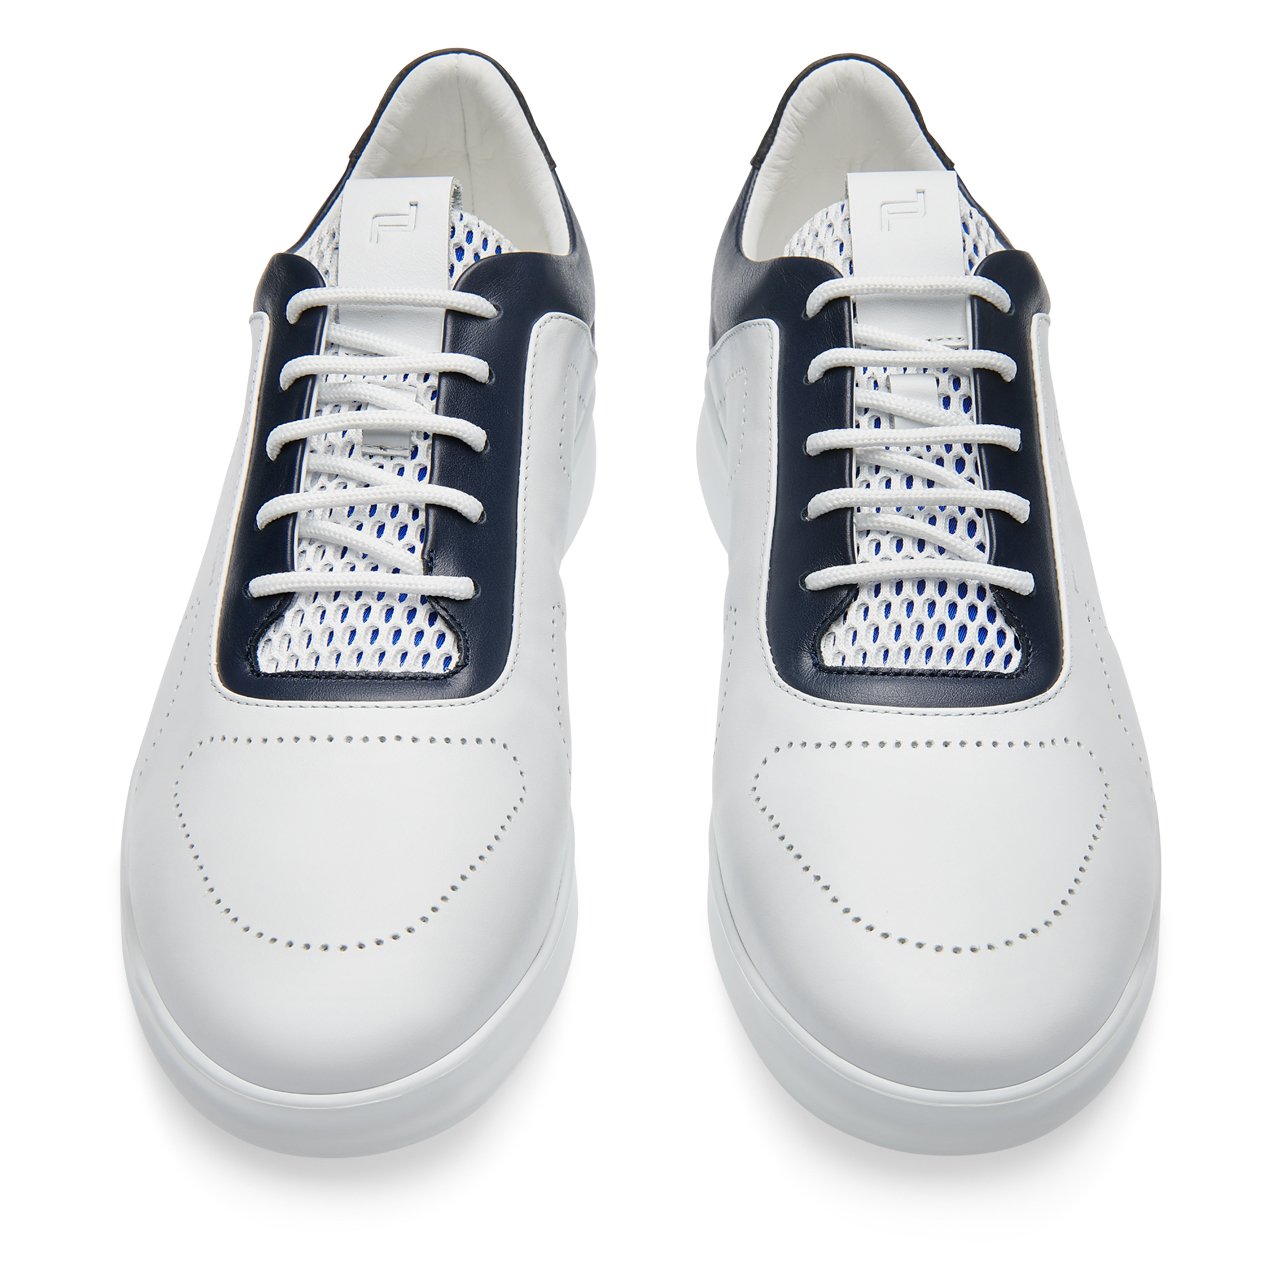 XL Extralight Calf Perforated Sneaker 